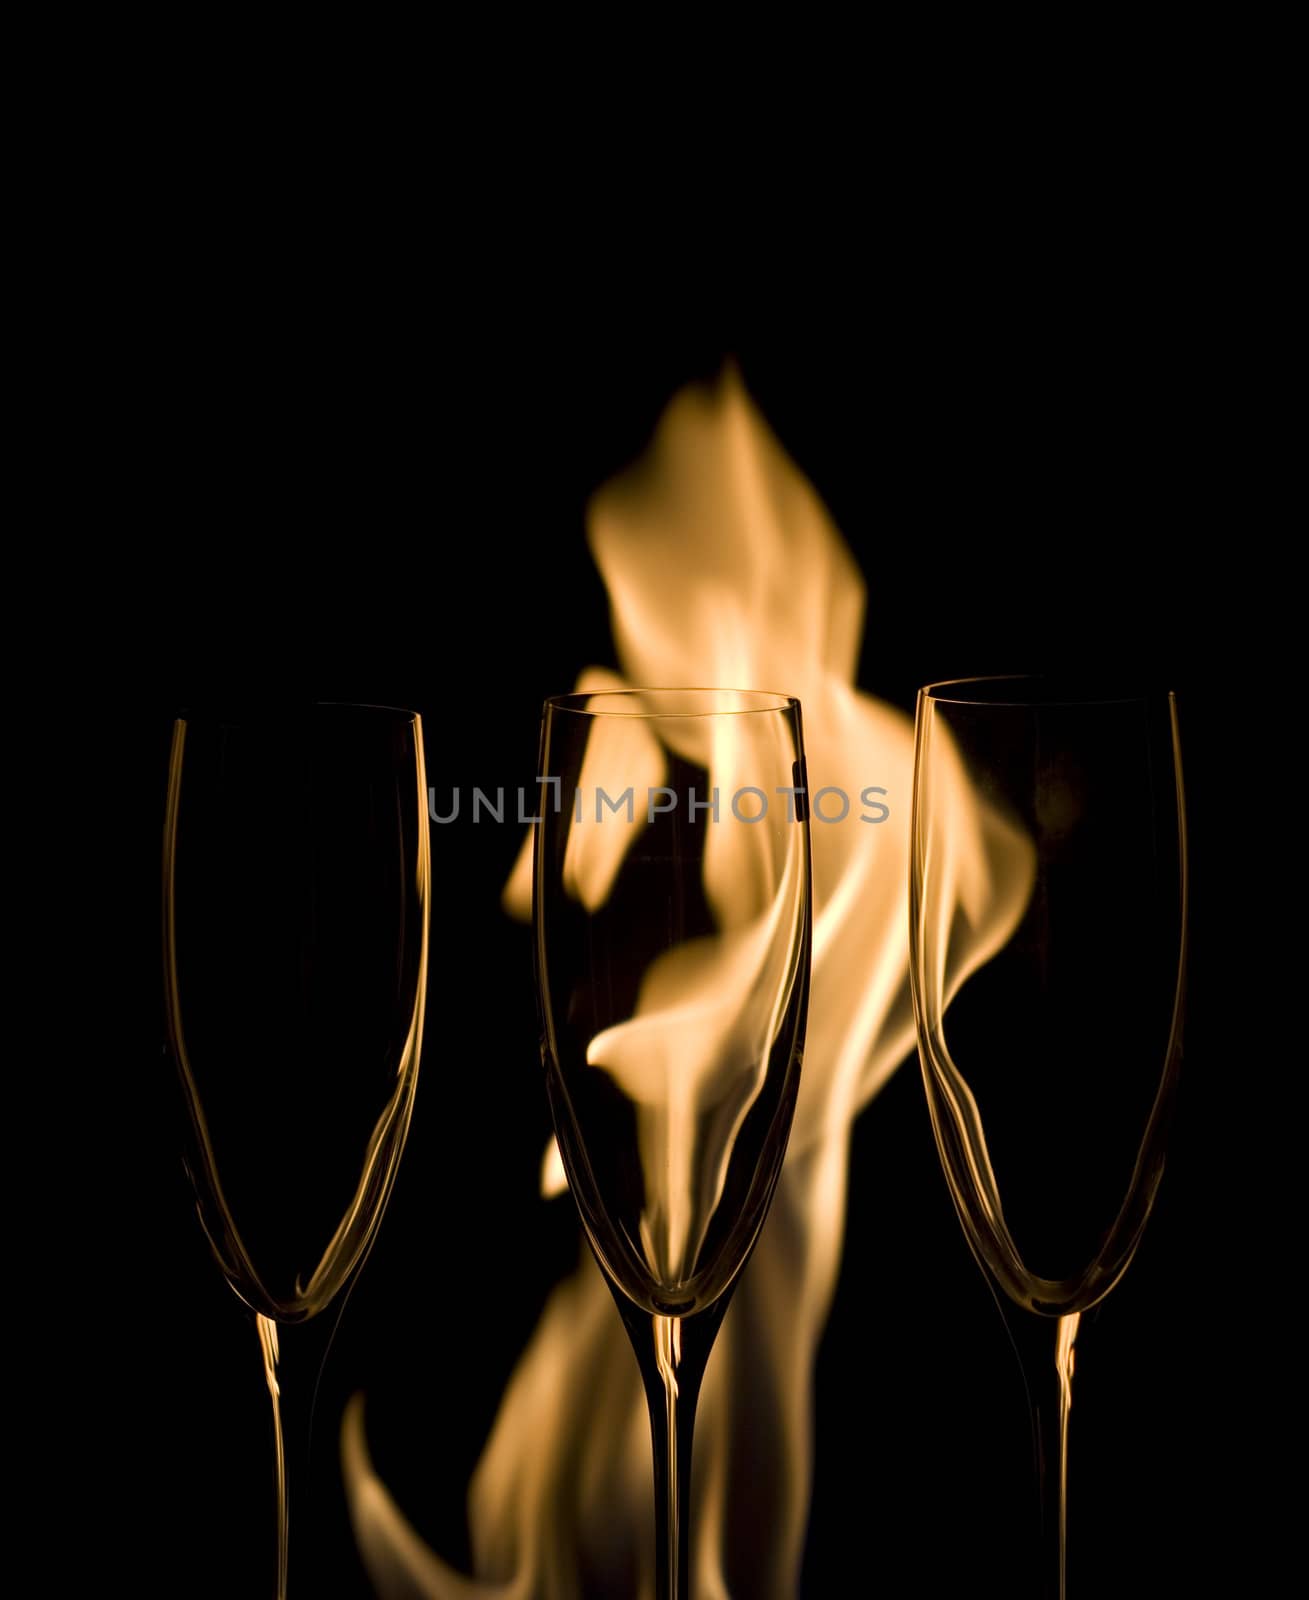 Three Crystal glasses and fire by Arsen